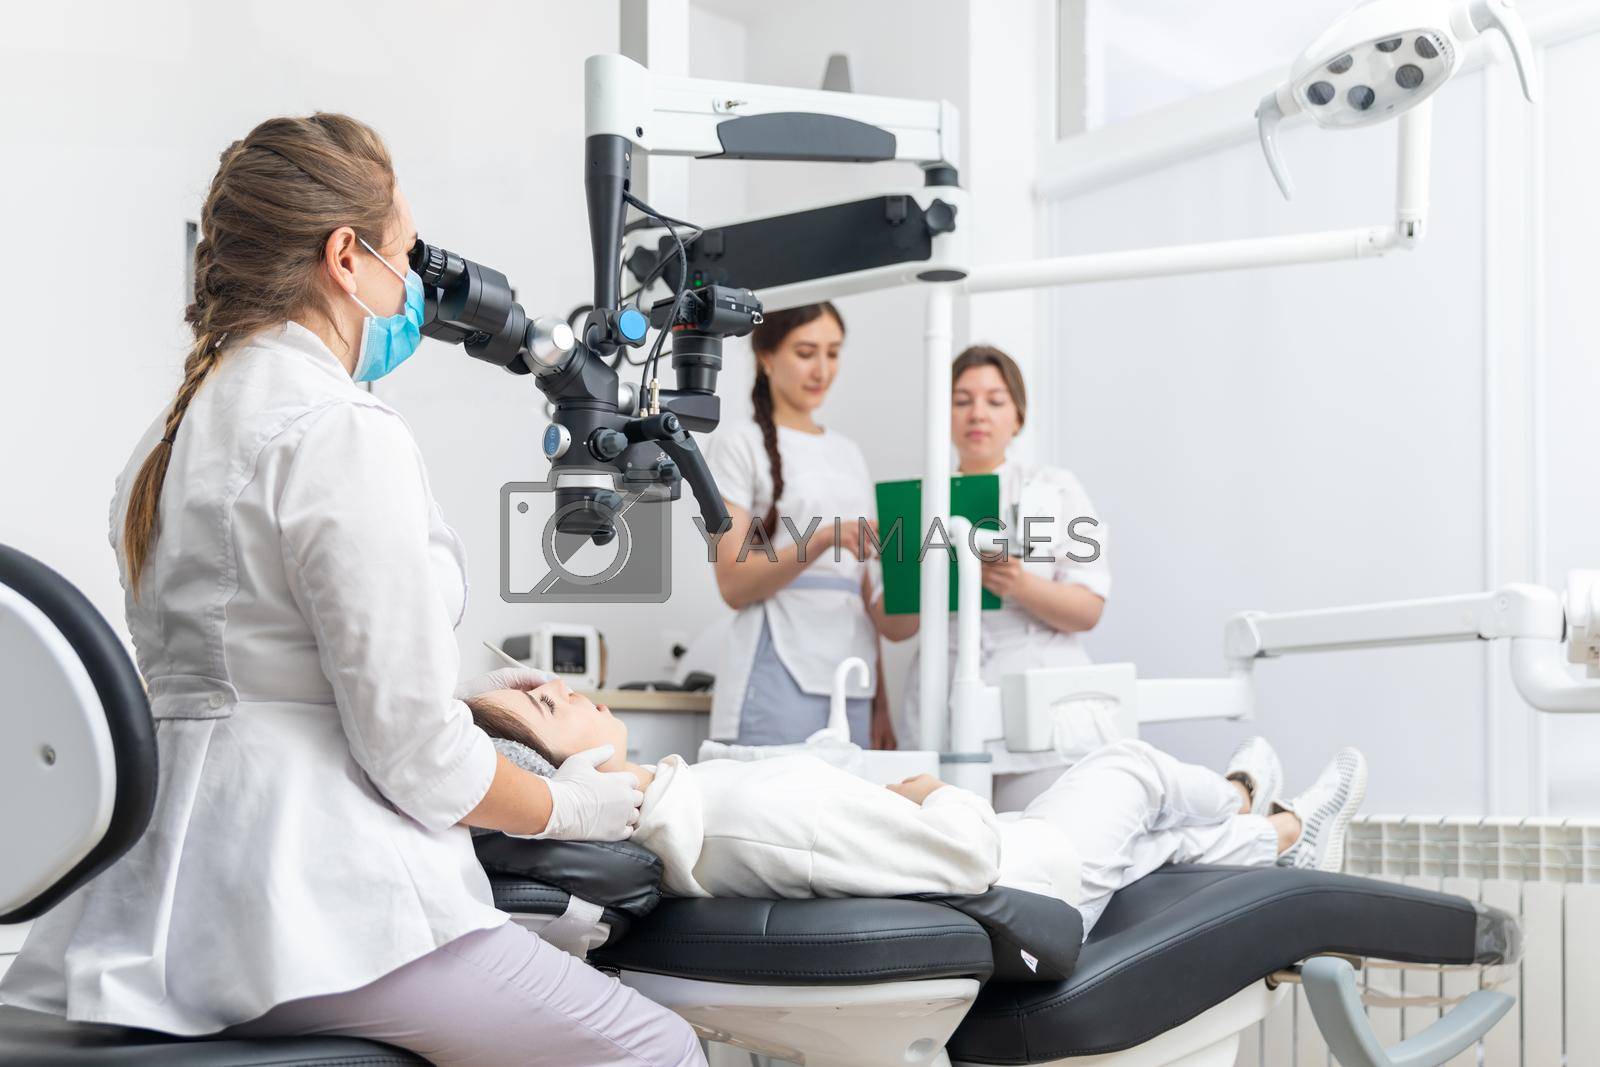 Female dentist using dental microscope treating patient teeth at dental clinic office. Medicine, dentistry and health care concept